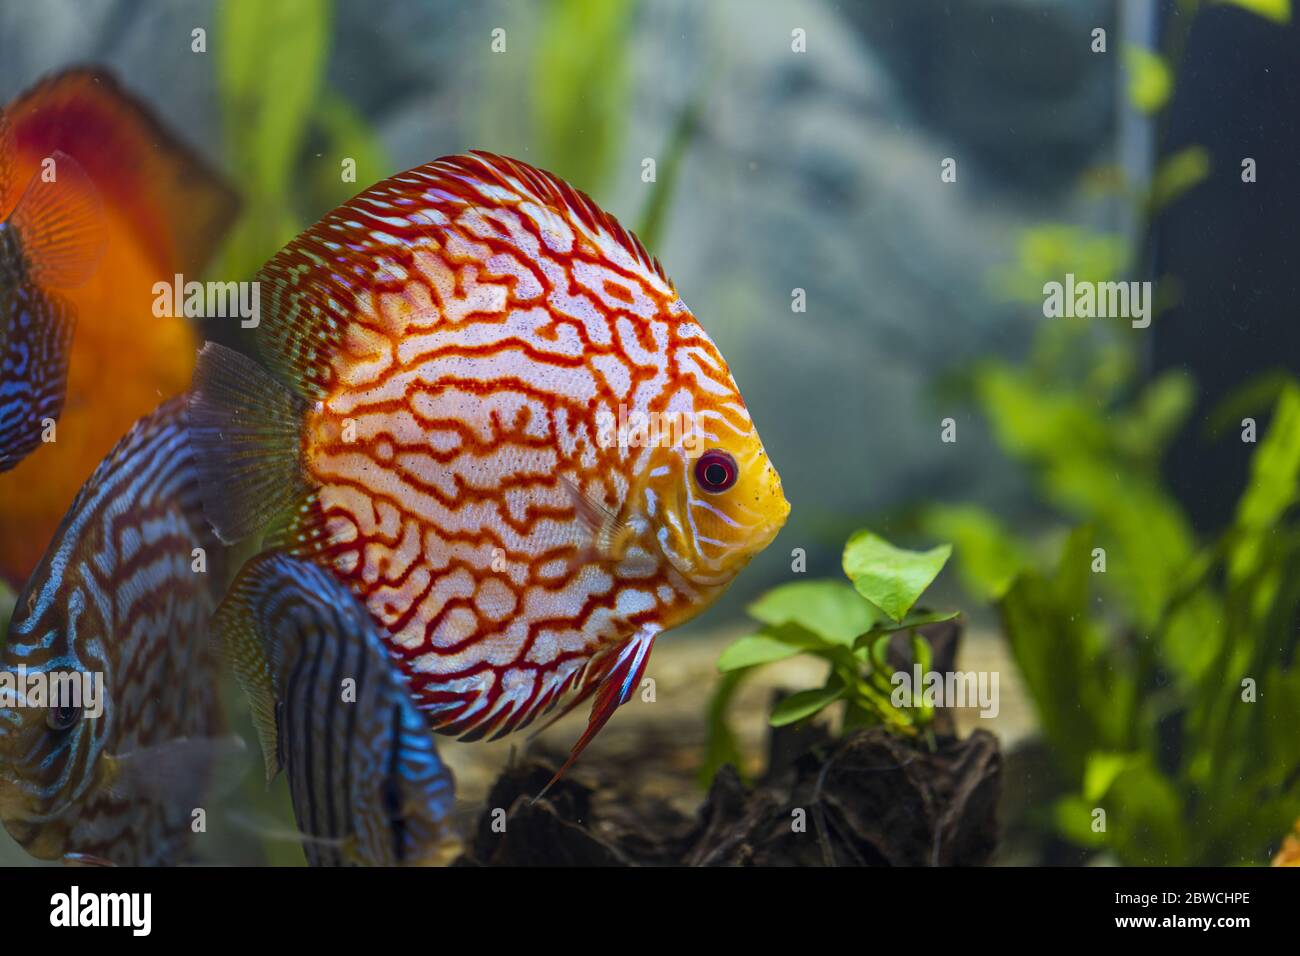 Close up view of gorgeous colorful aquarium fishes discus. Beautiful nature background. Stock Photo